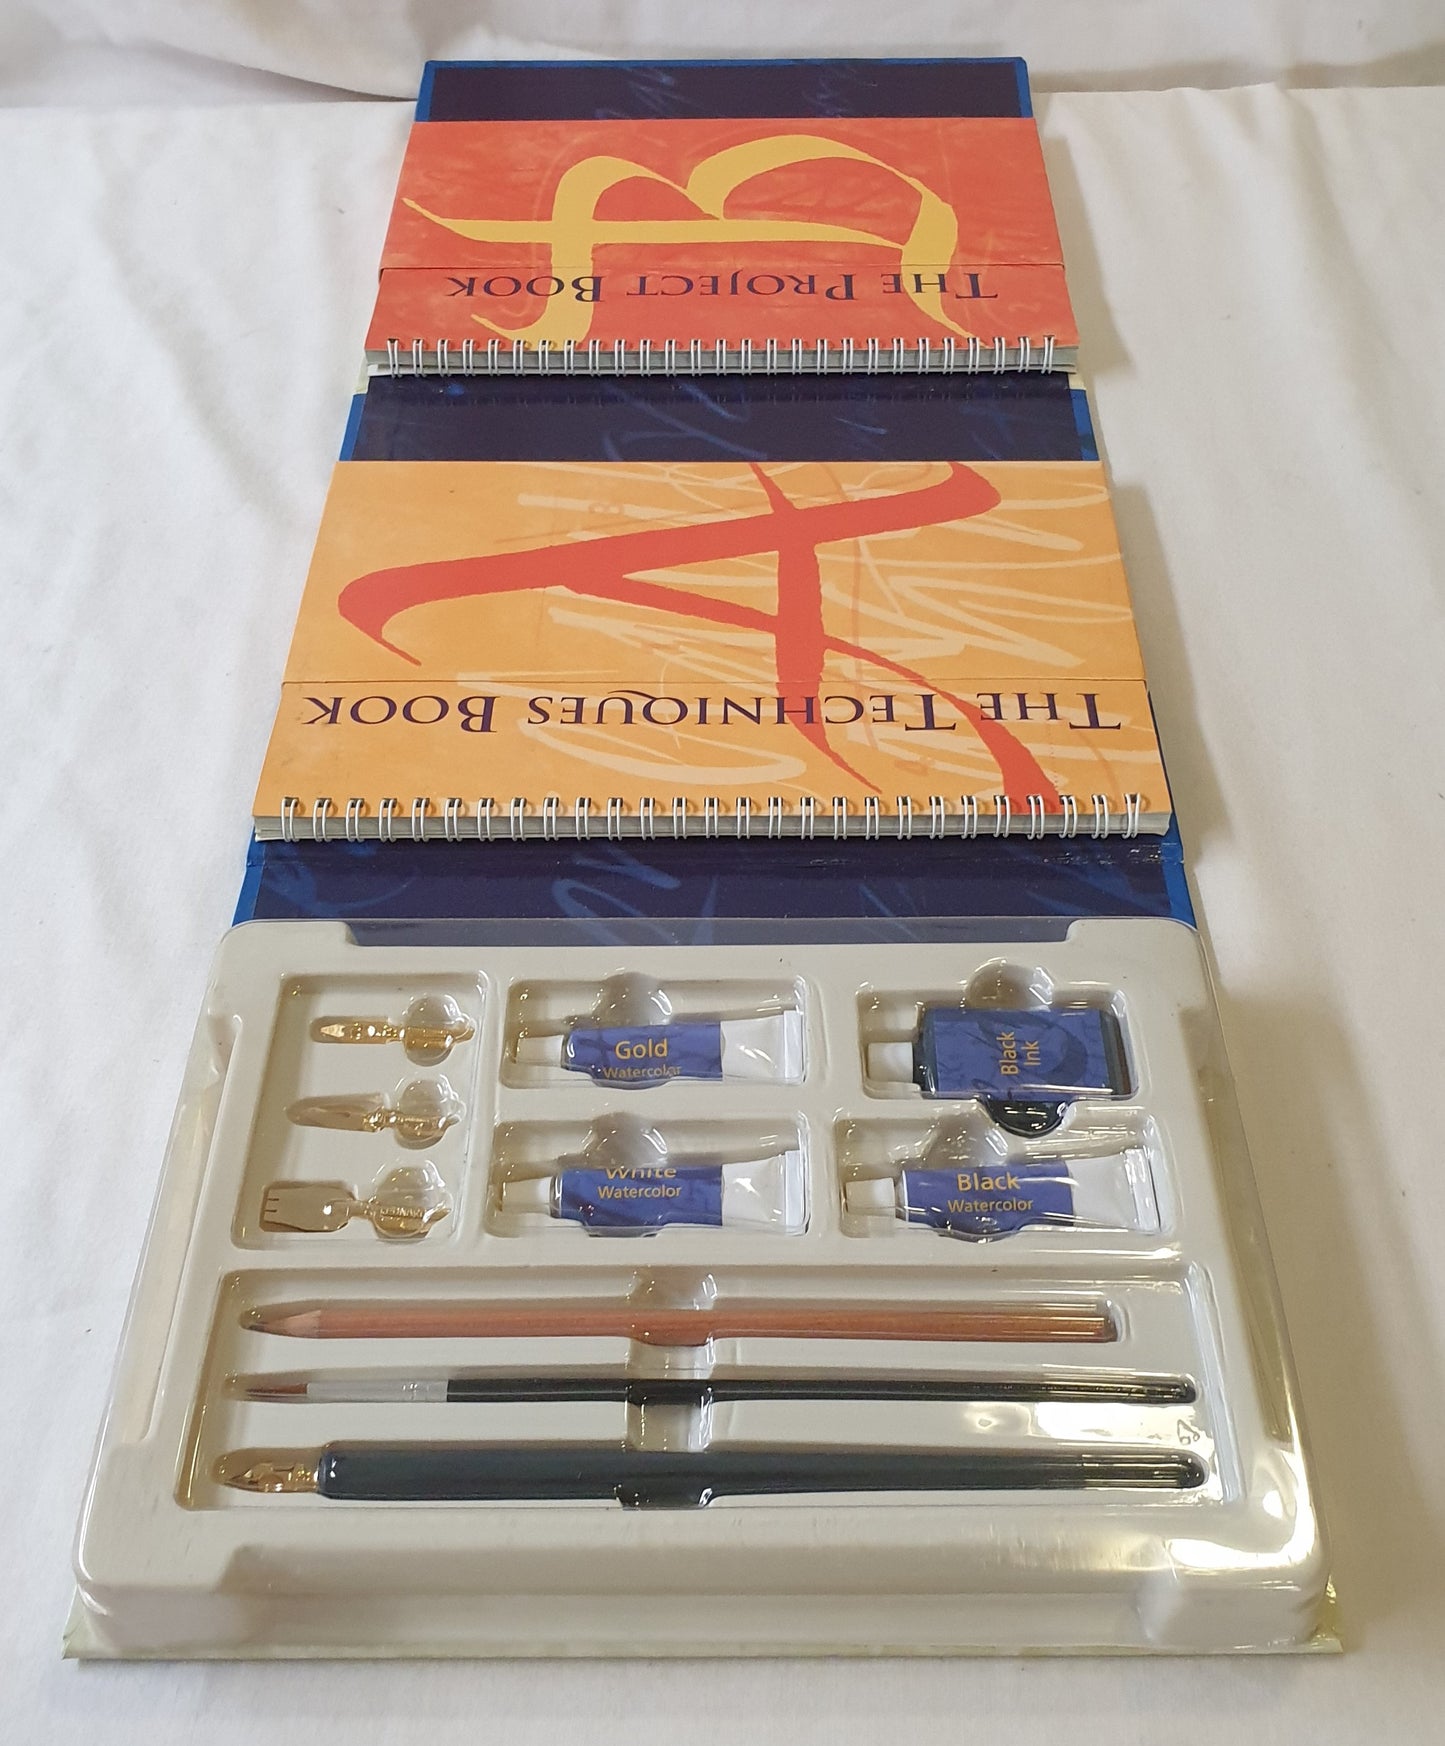 The Complete Calligraphy Set by Ann Bowen